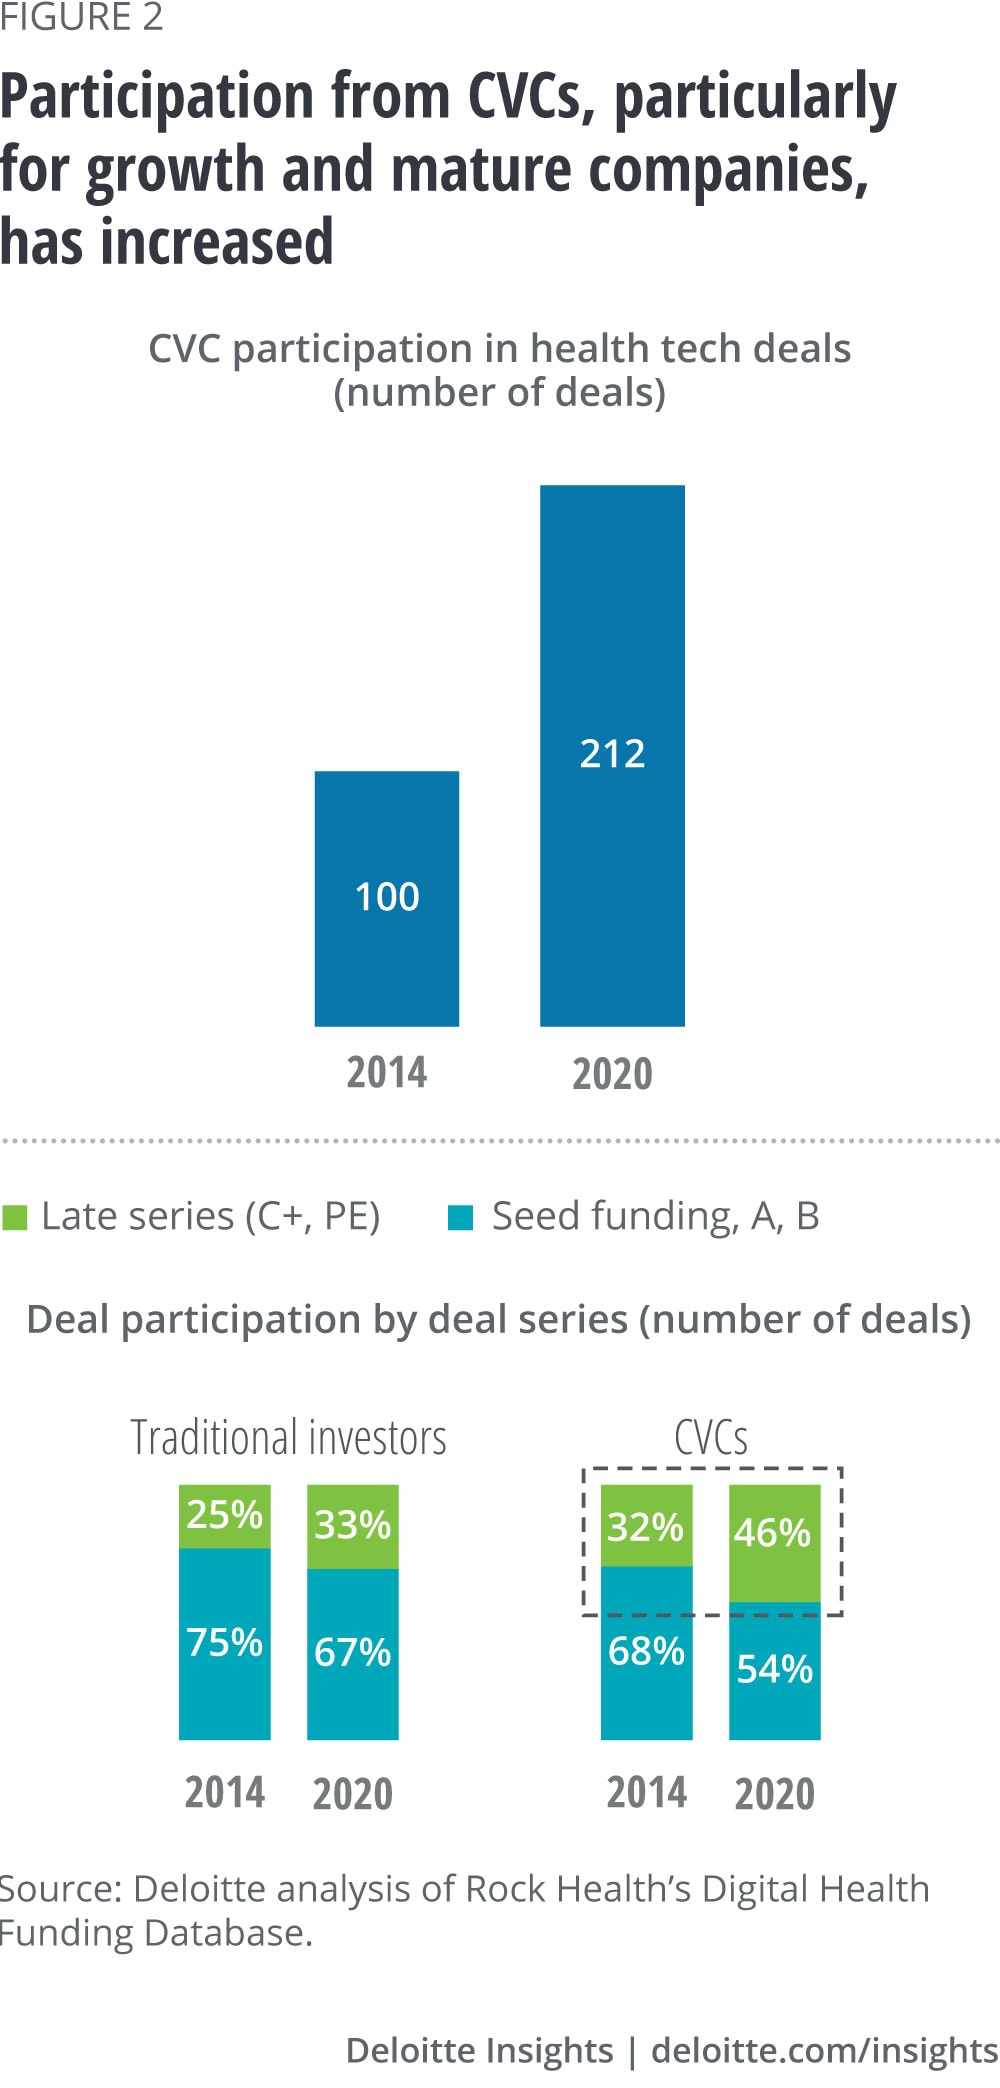 Figure 2. Participation from CVCs, particularly for growth and mature companies, has increased